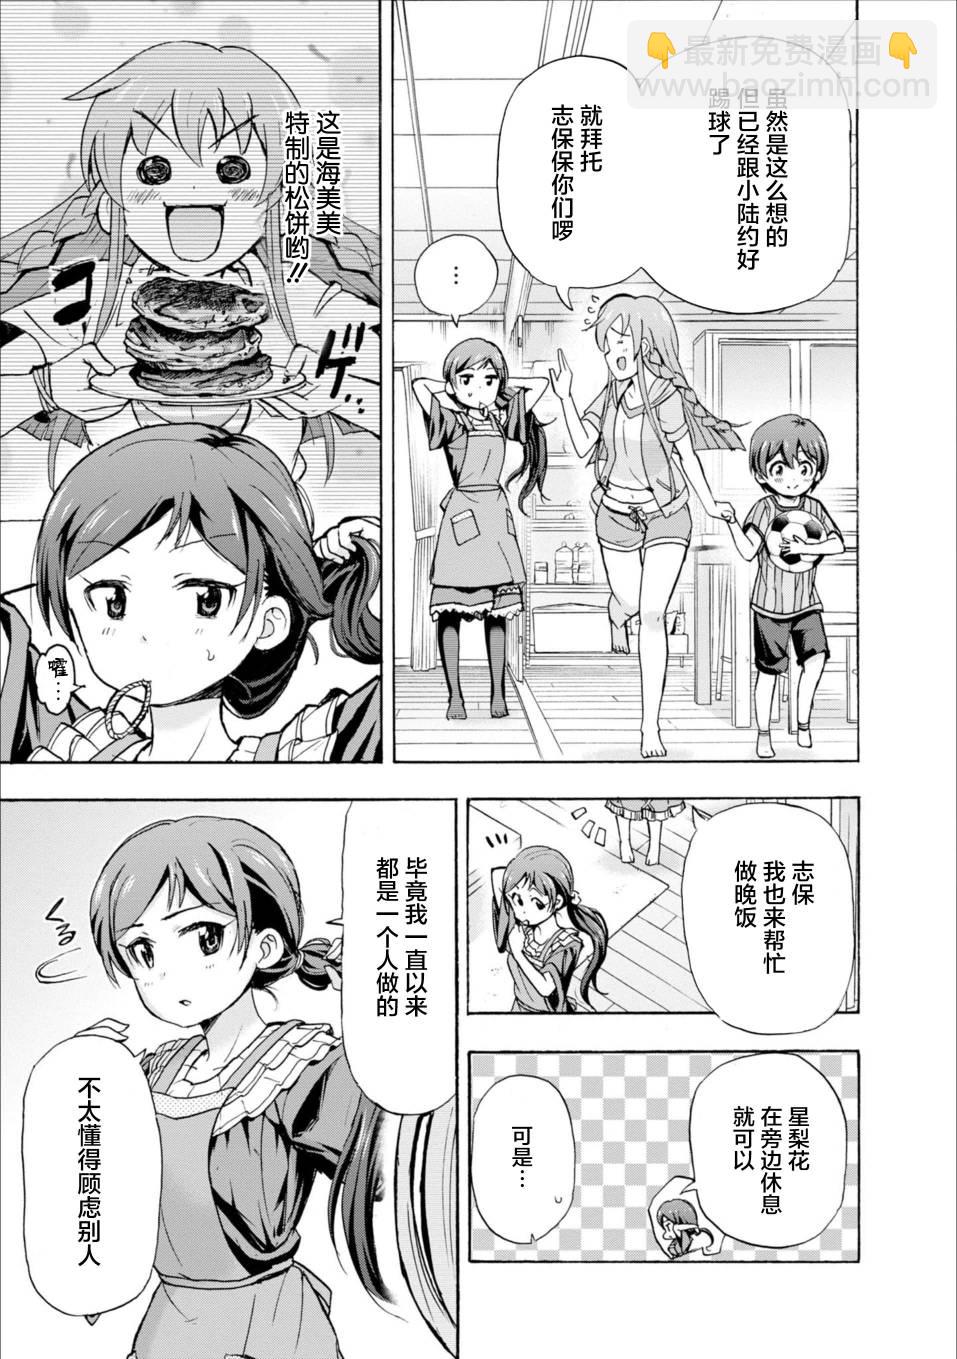 THE IDOLM@STER MILLION LIVE! Blooming Clover - 14話 - 2